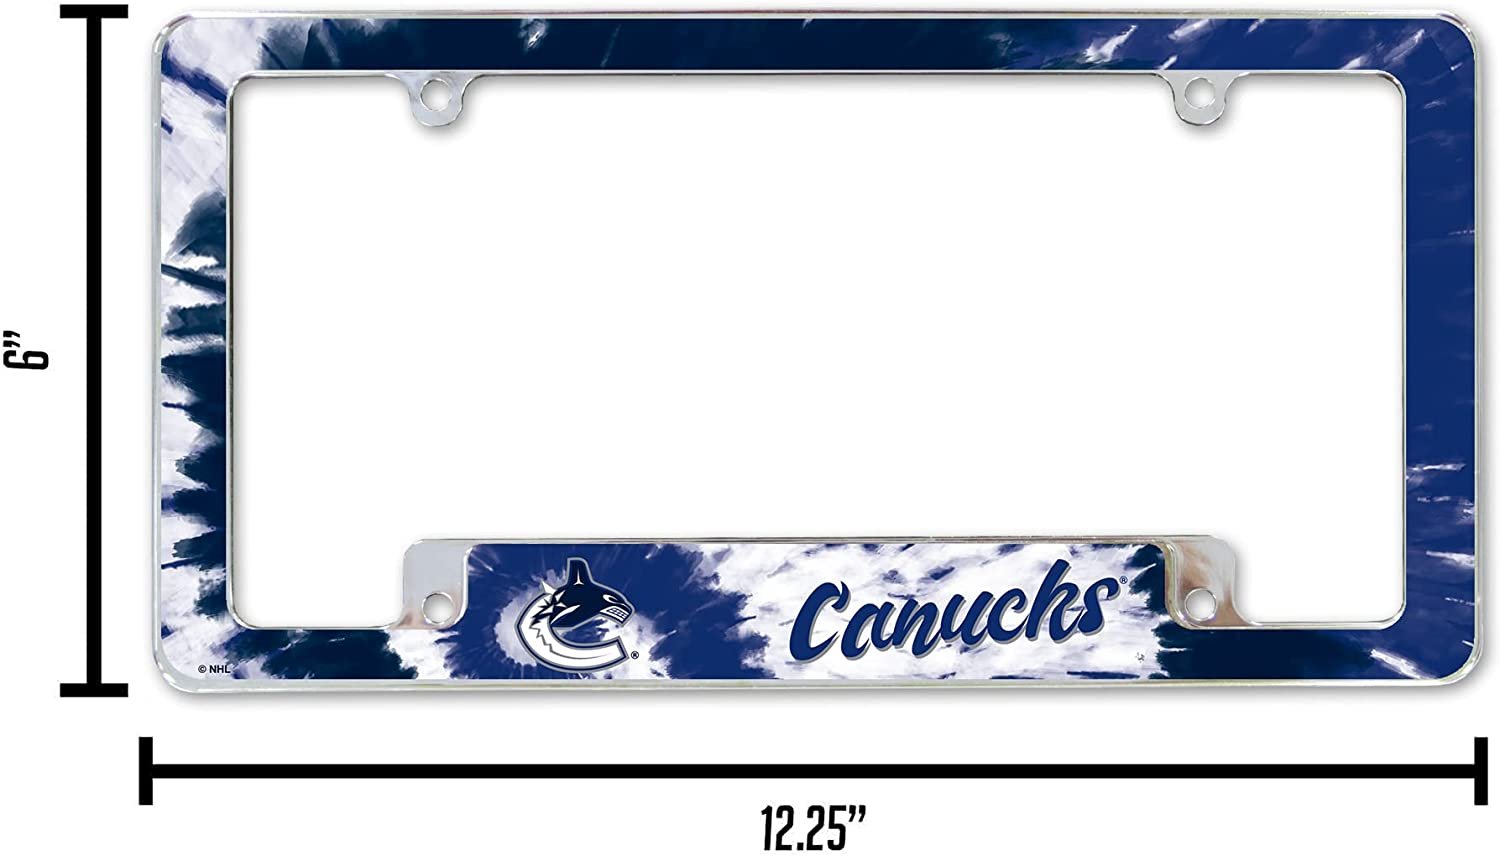 Vancouver Canucks Metal License Plate Frame Chrome Tag Cover Tie Dye Design 6x12 Inch